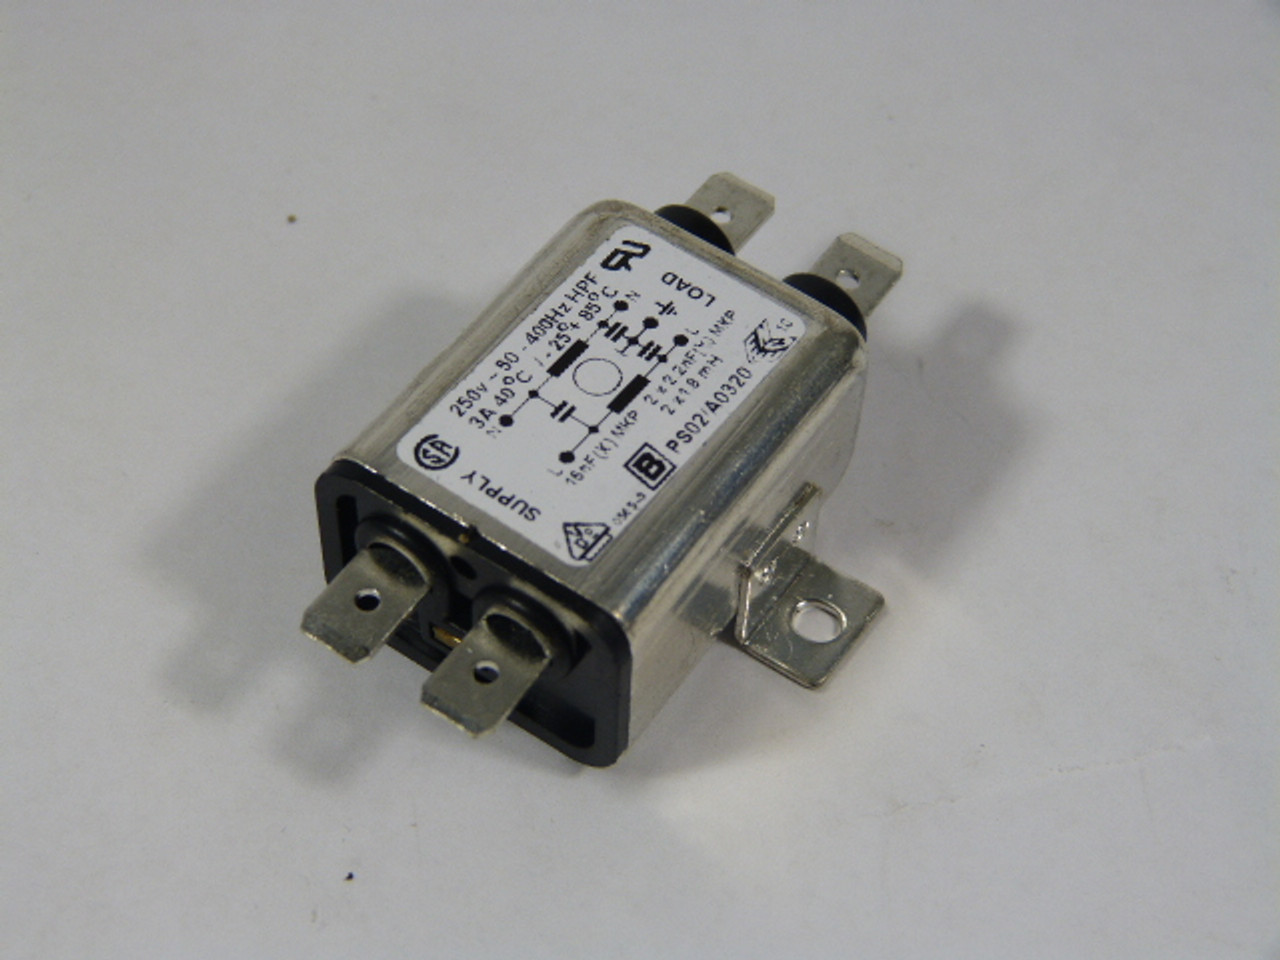 Bulgin PS02/A0320/63 Base Mounting Line Filter 3 Amp 250 Vac USED